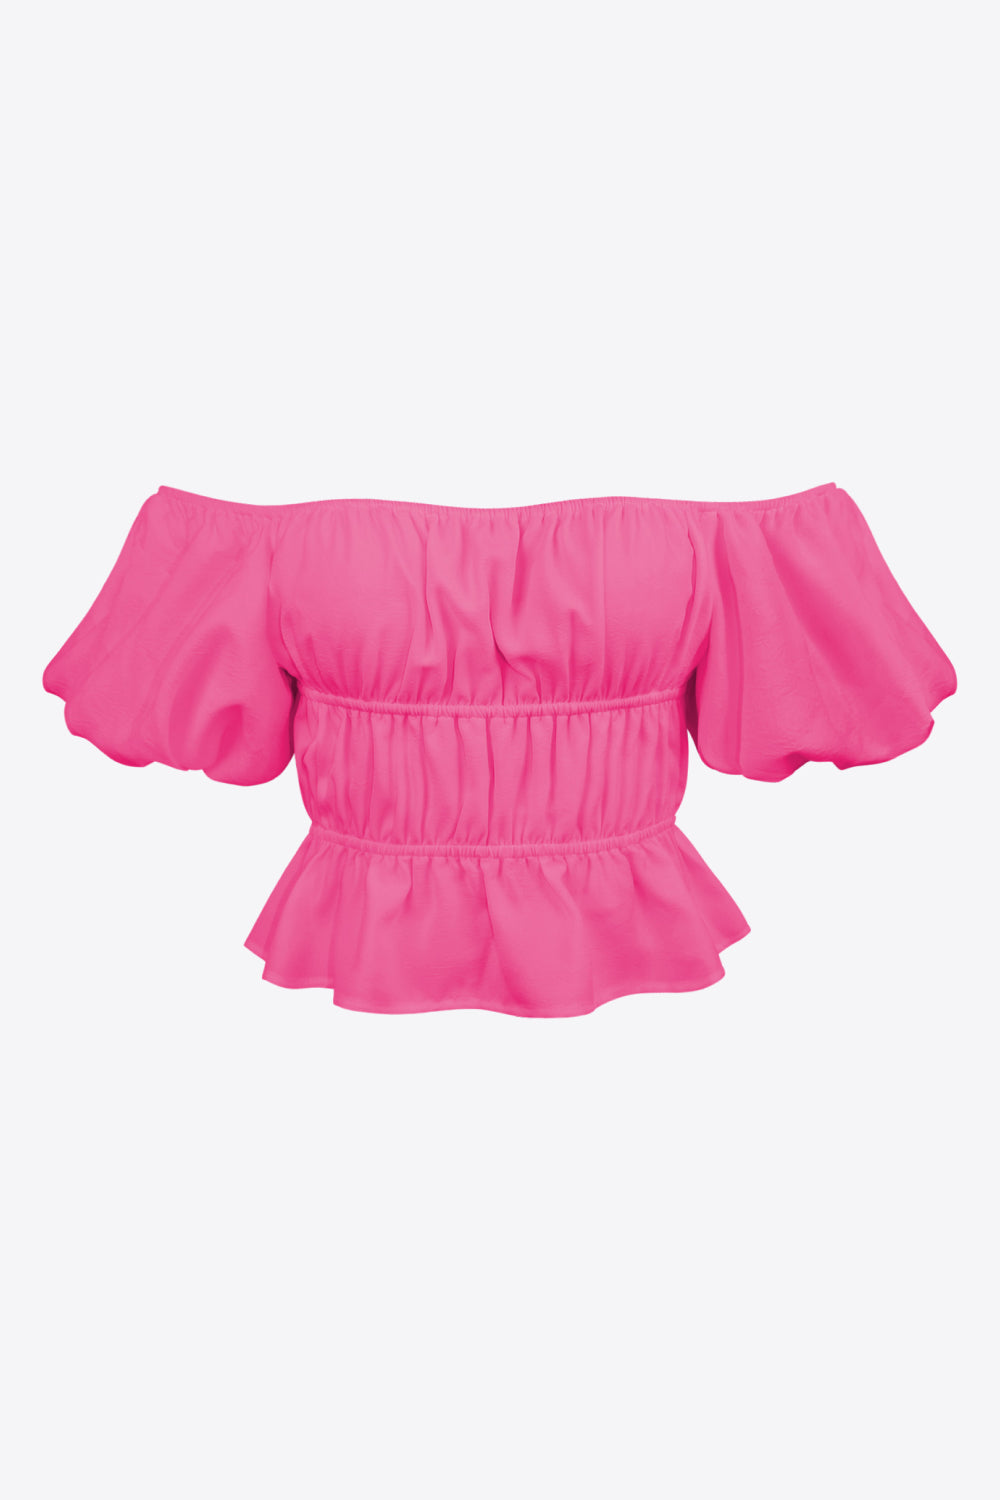 Appolonia Vintage Peasant Square Puff Sleeve Cropped Blouse | Black, White, Hot Pink, or Tan